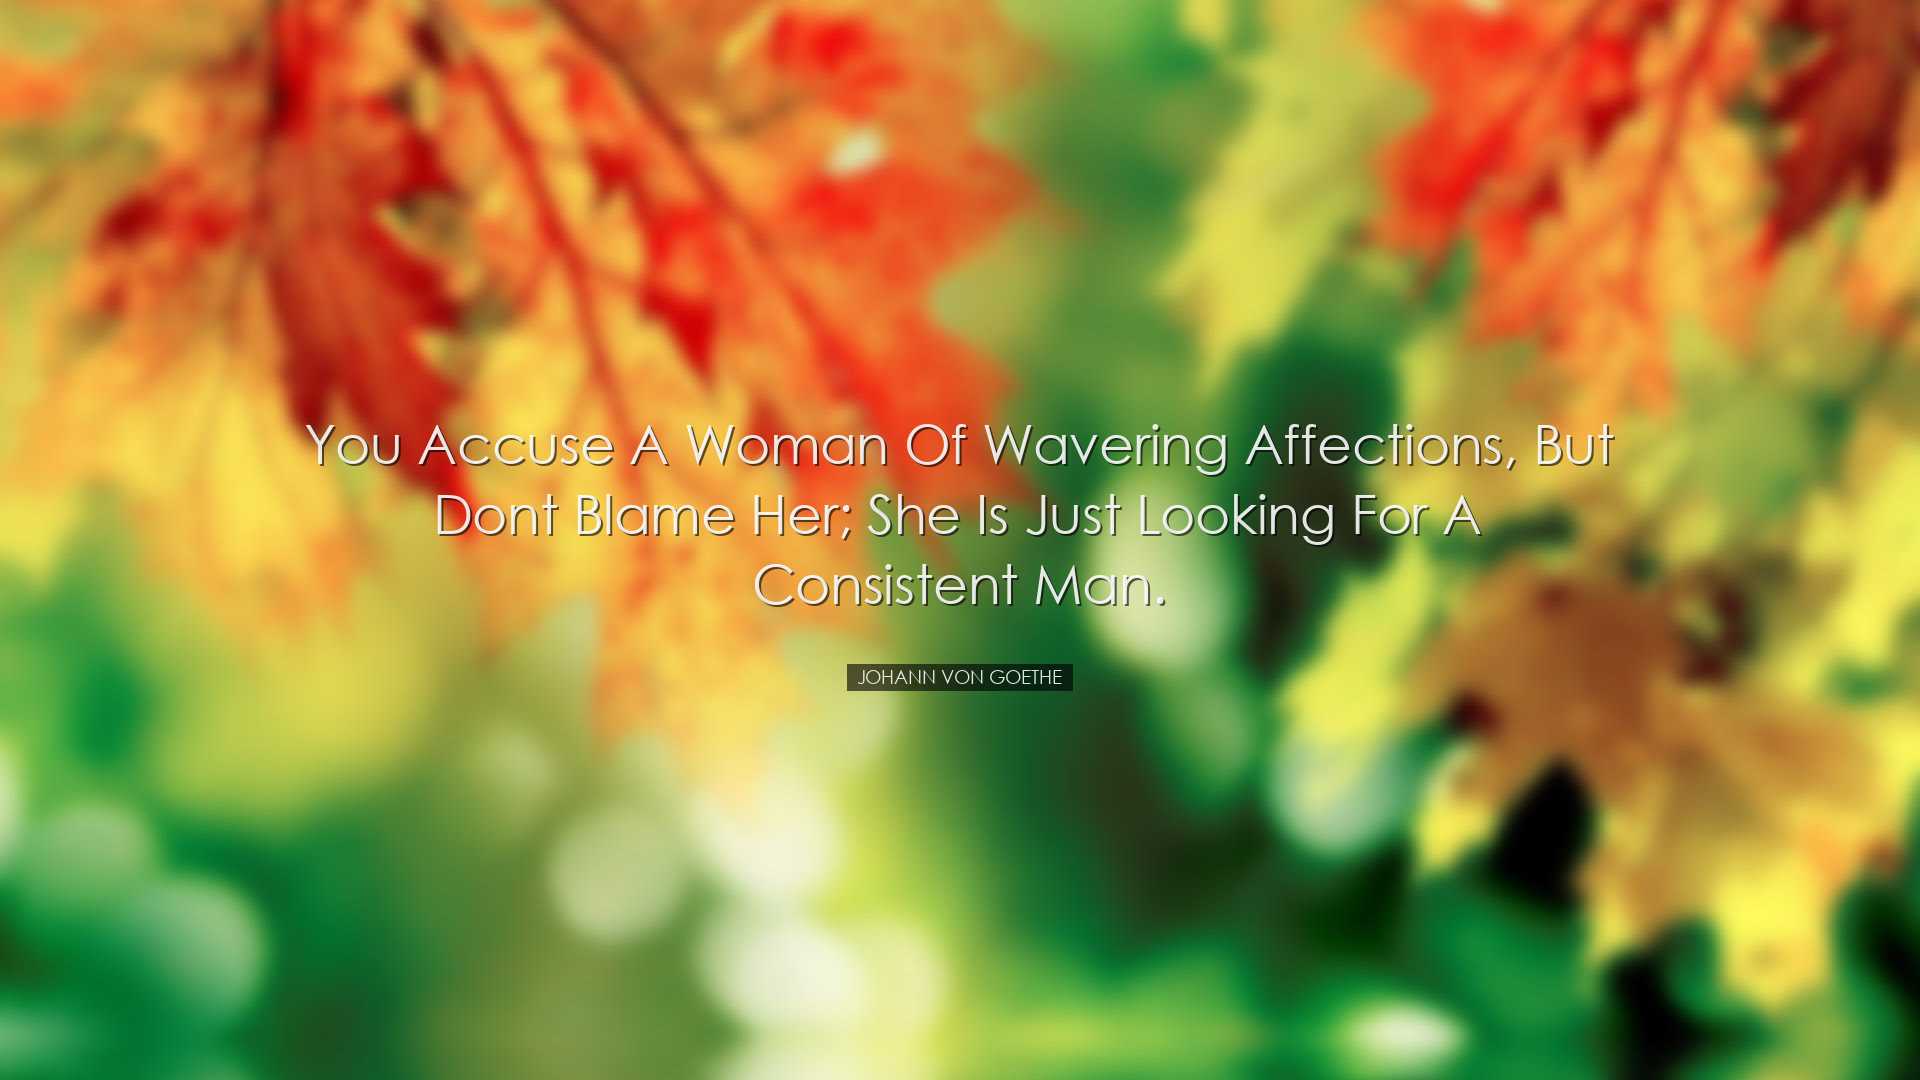 You accuse a woman of wavering affections, but dont blame her; she